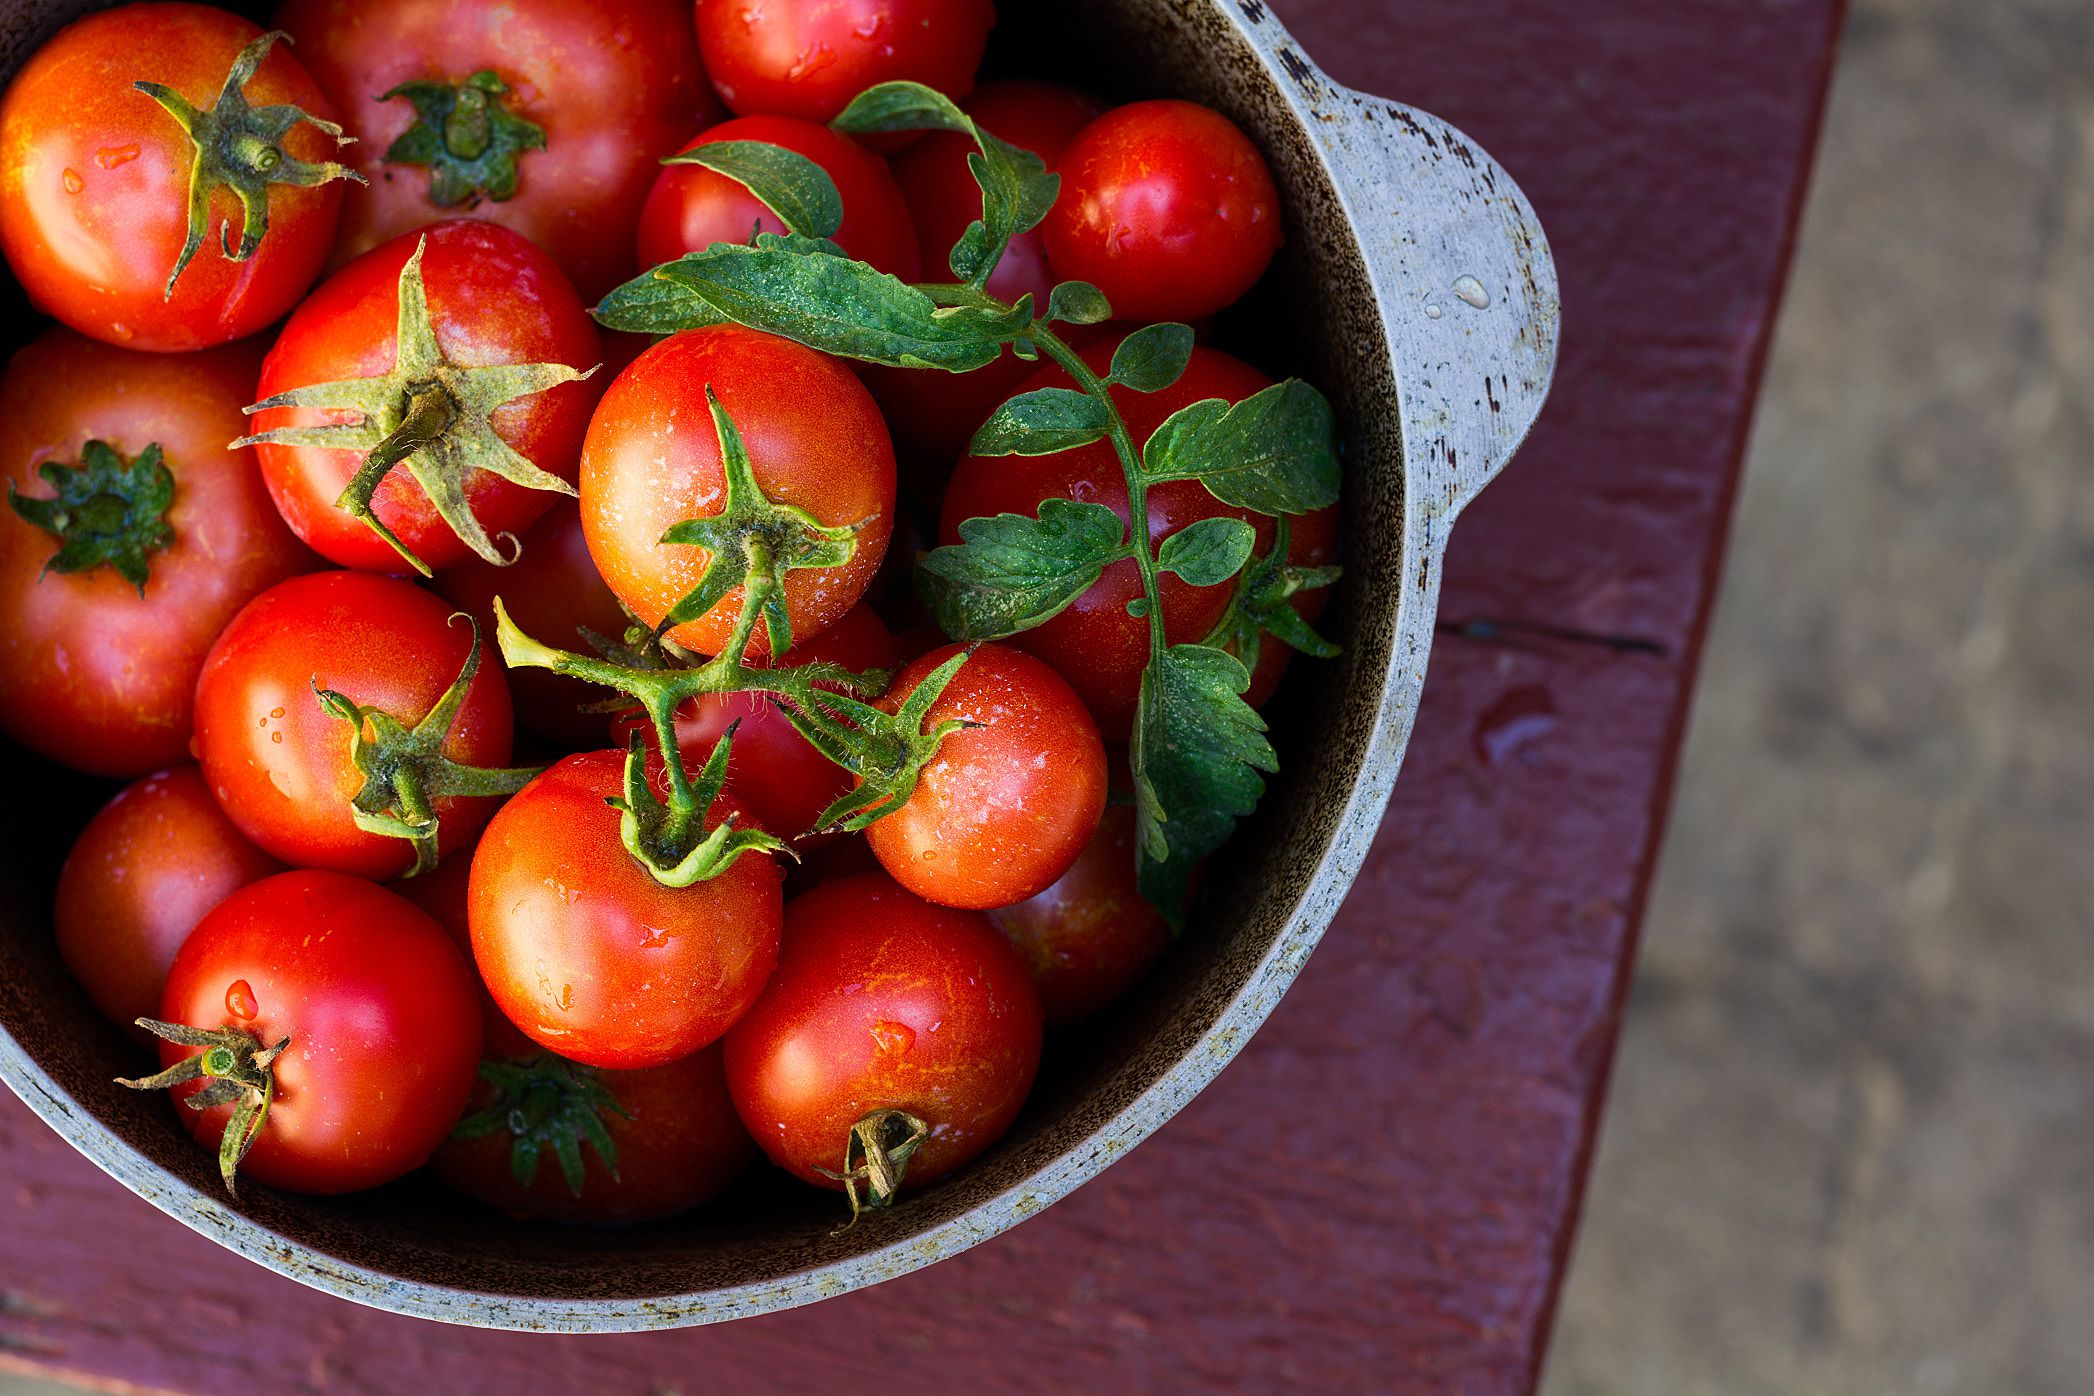 10 Tips for Growing Great Tomatoes